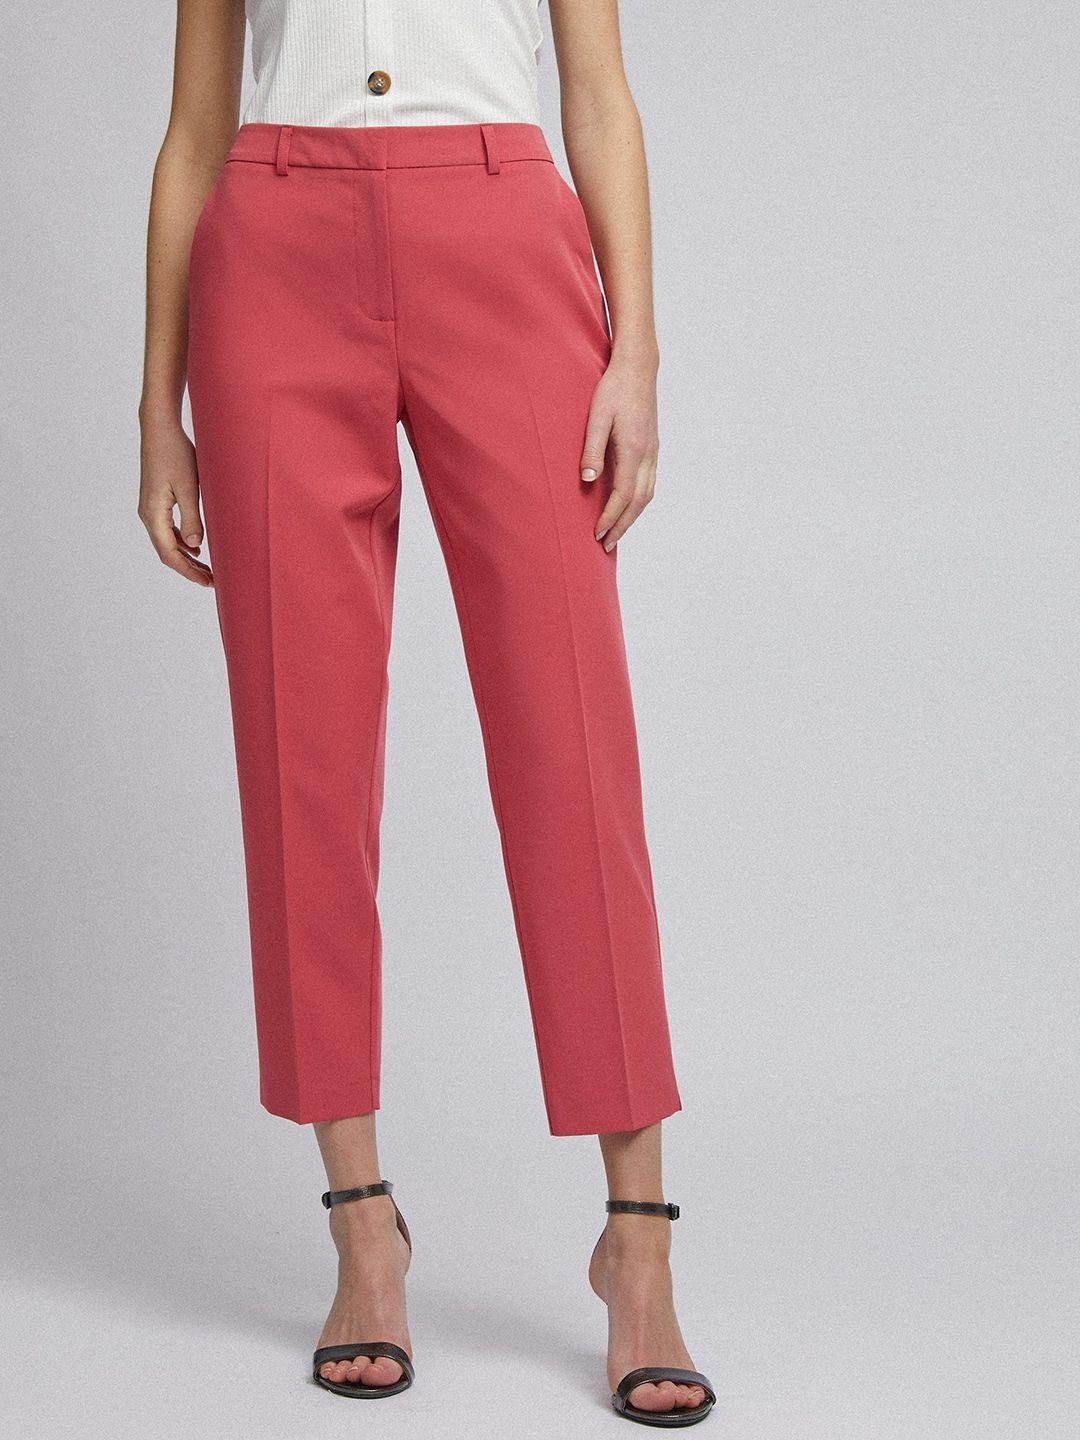 dorothy perkins women pink solid cropped trousers